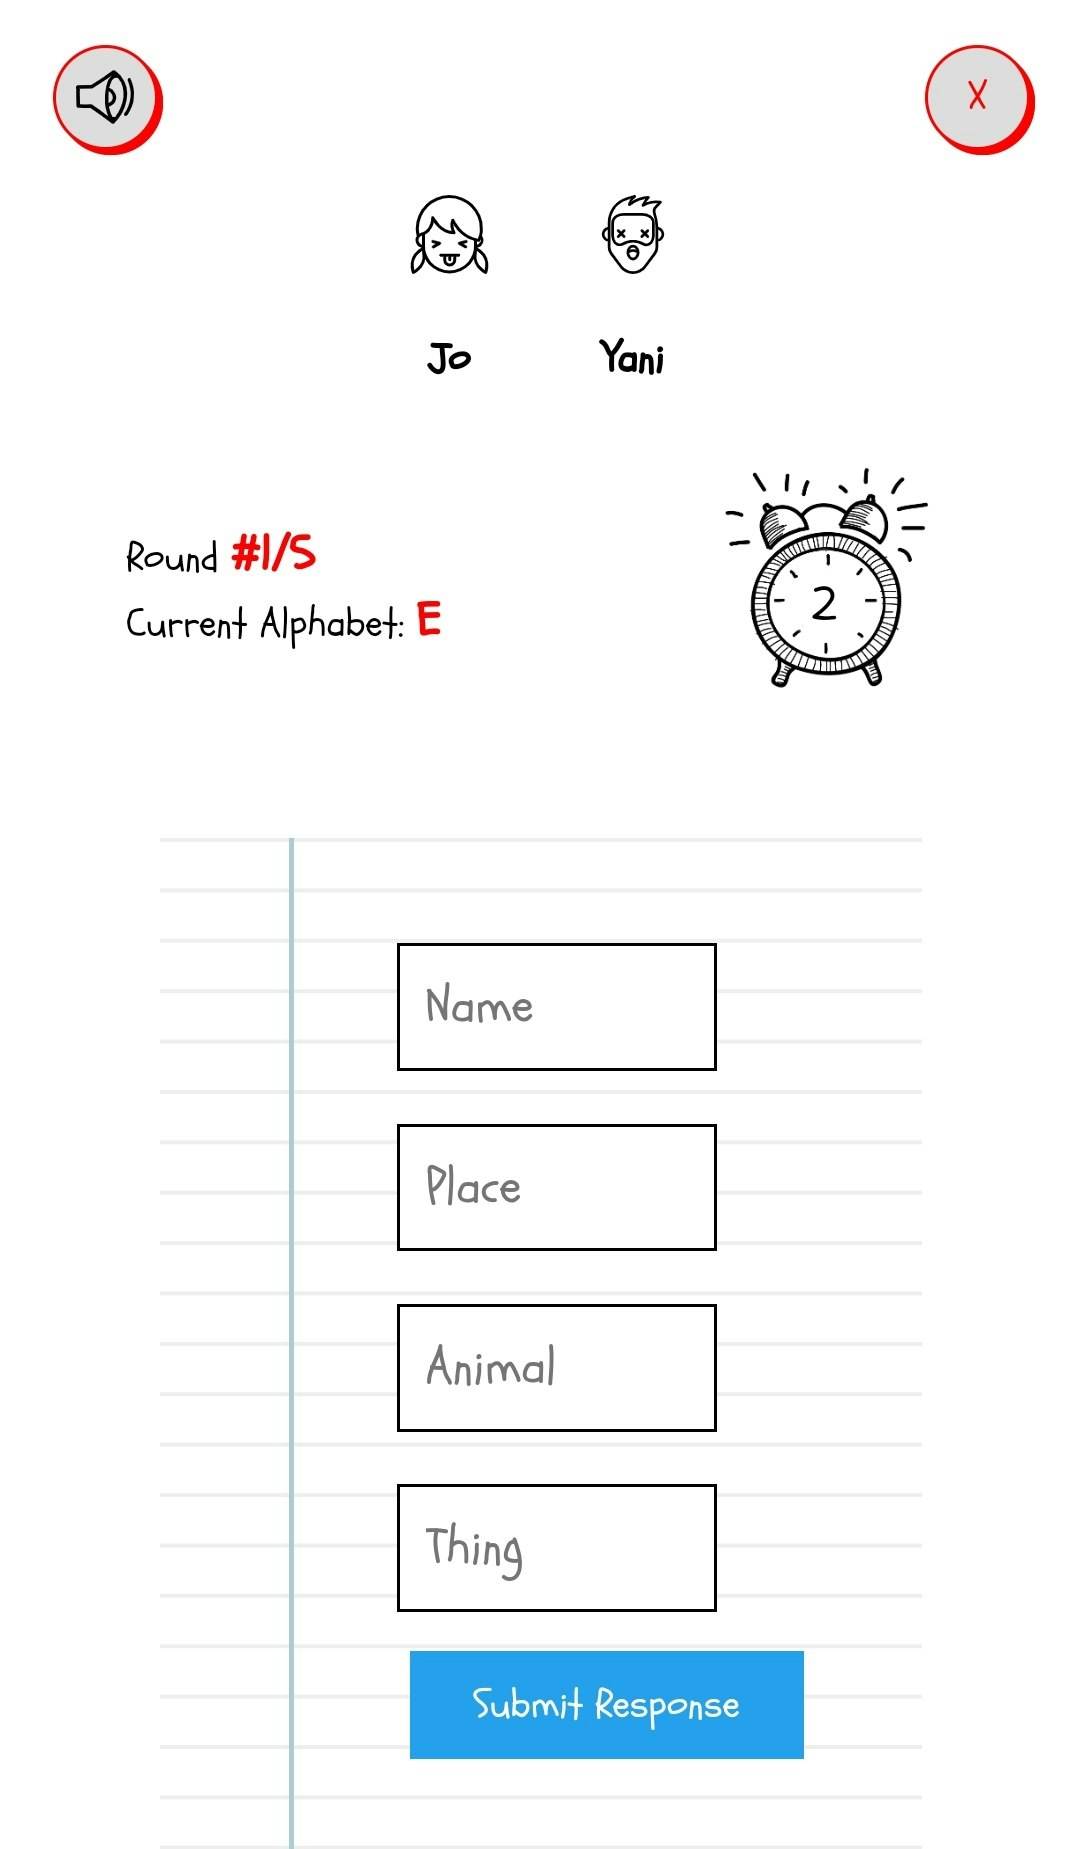 Name, Place, Animal, Thing! - We used to play this word/memory game back in  middle school!